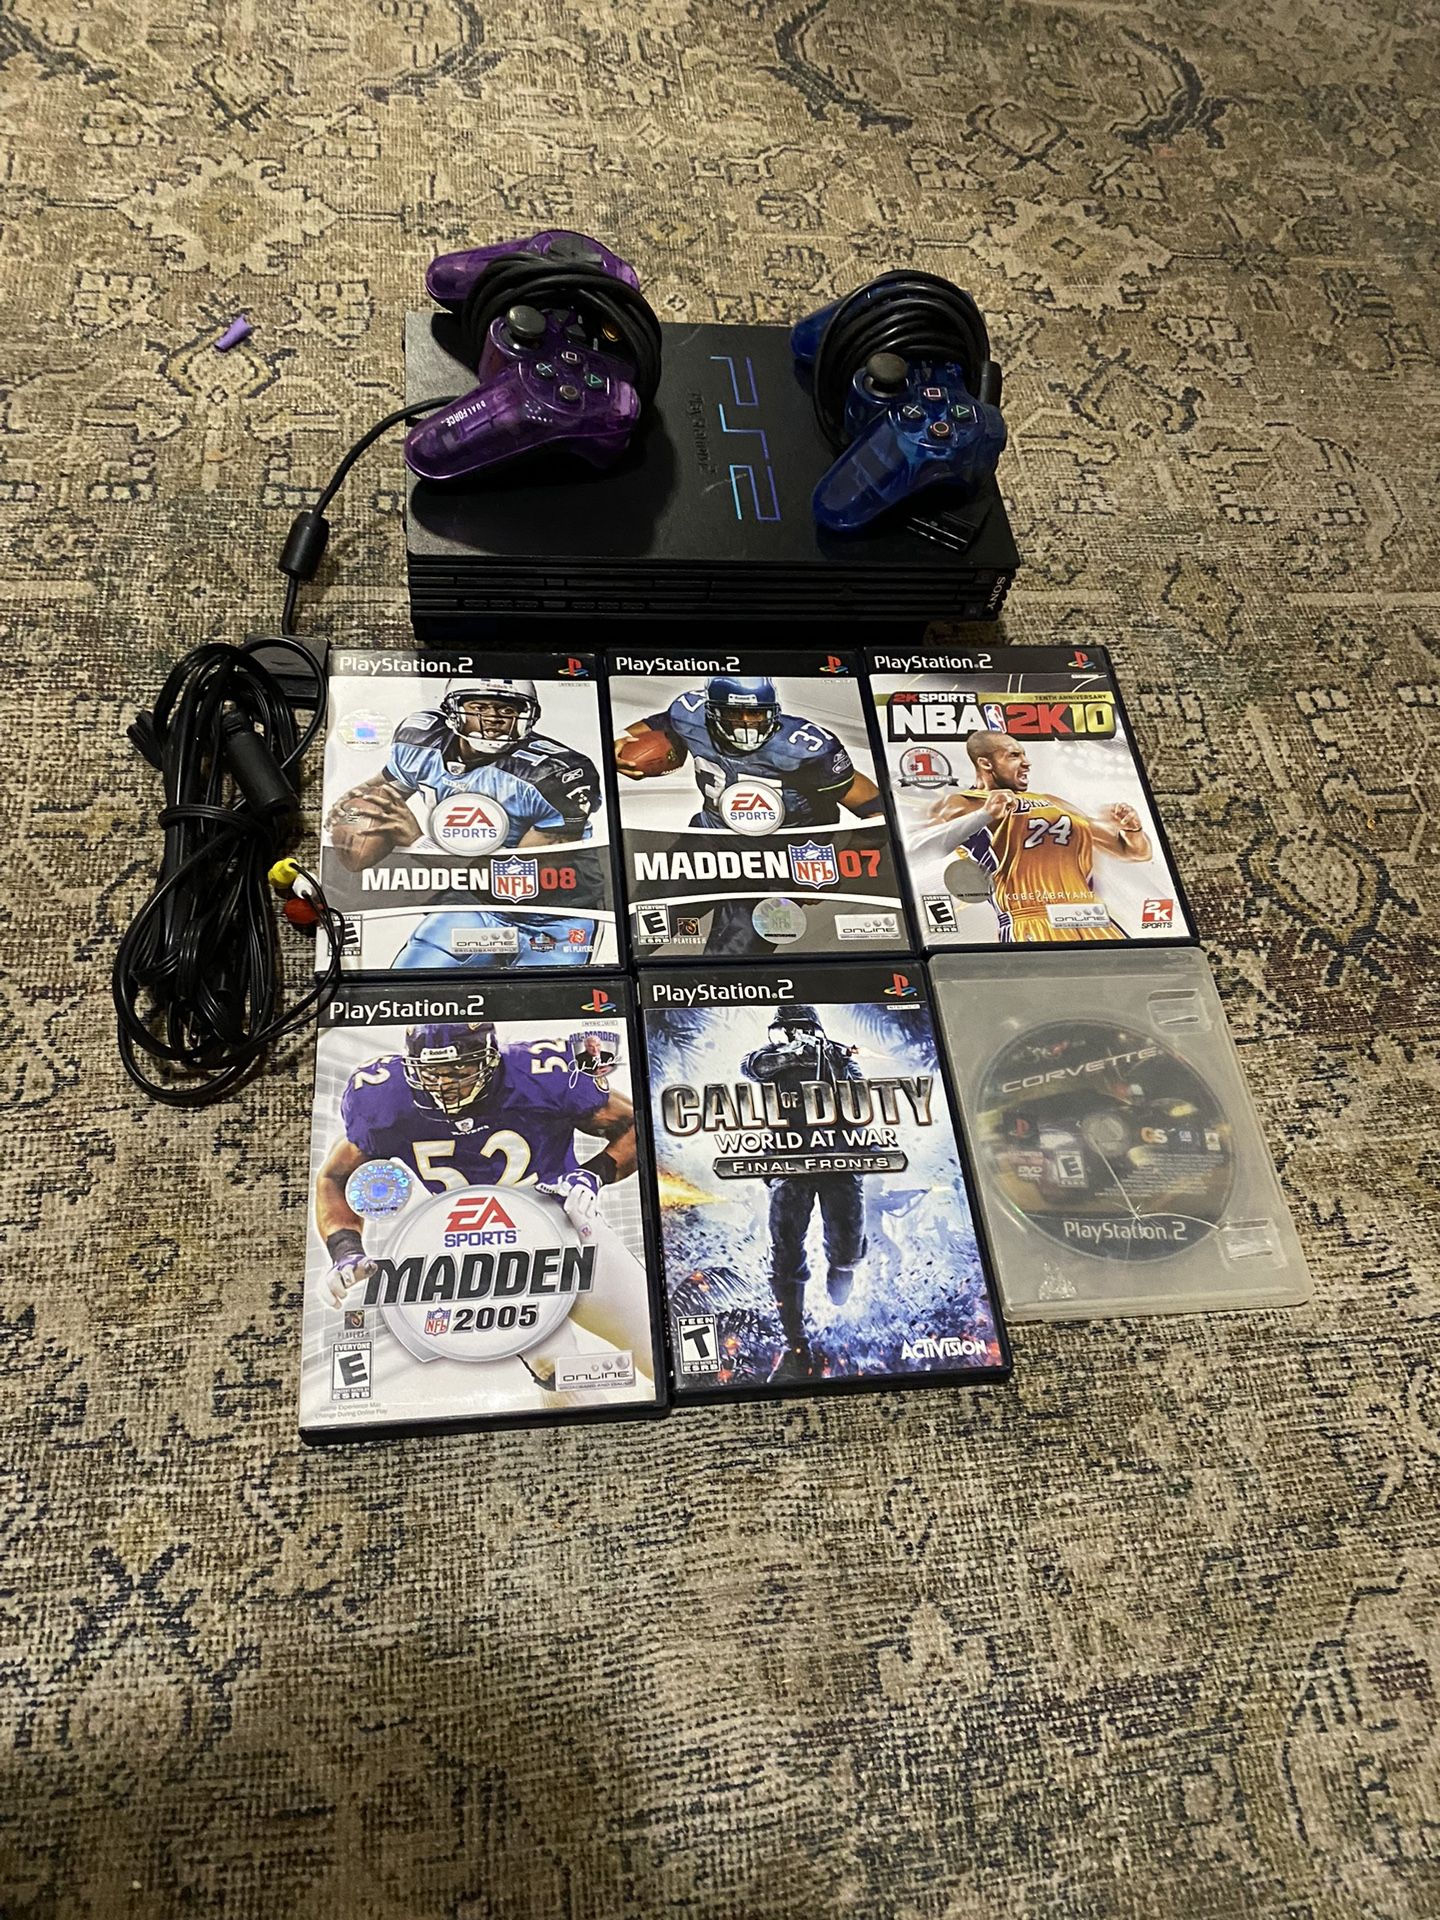 PS2 With 2 Controllers, It Comes With All The Wires For The PS2 And The Games.